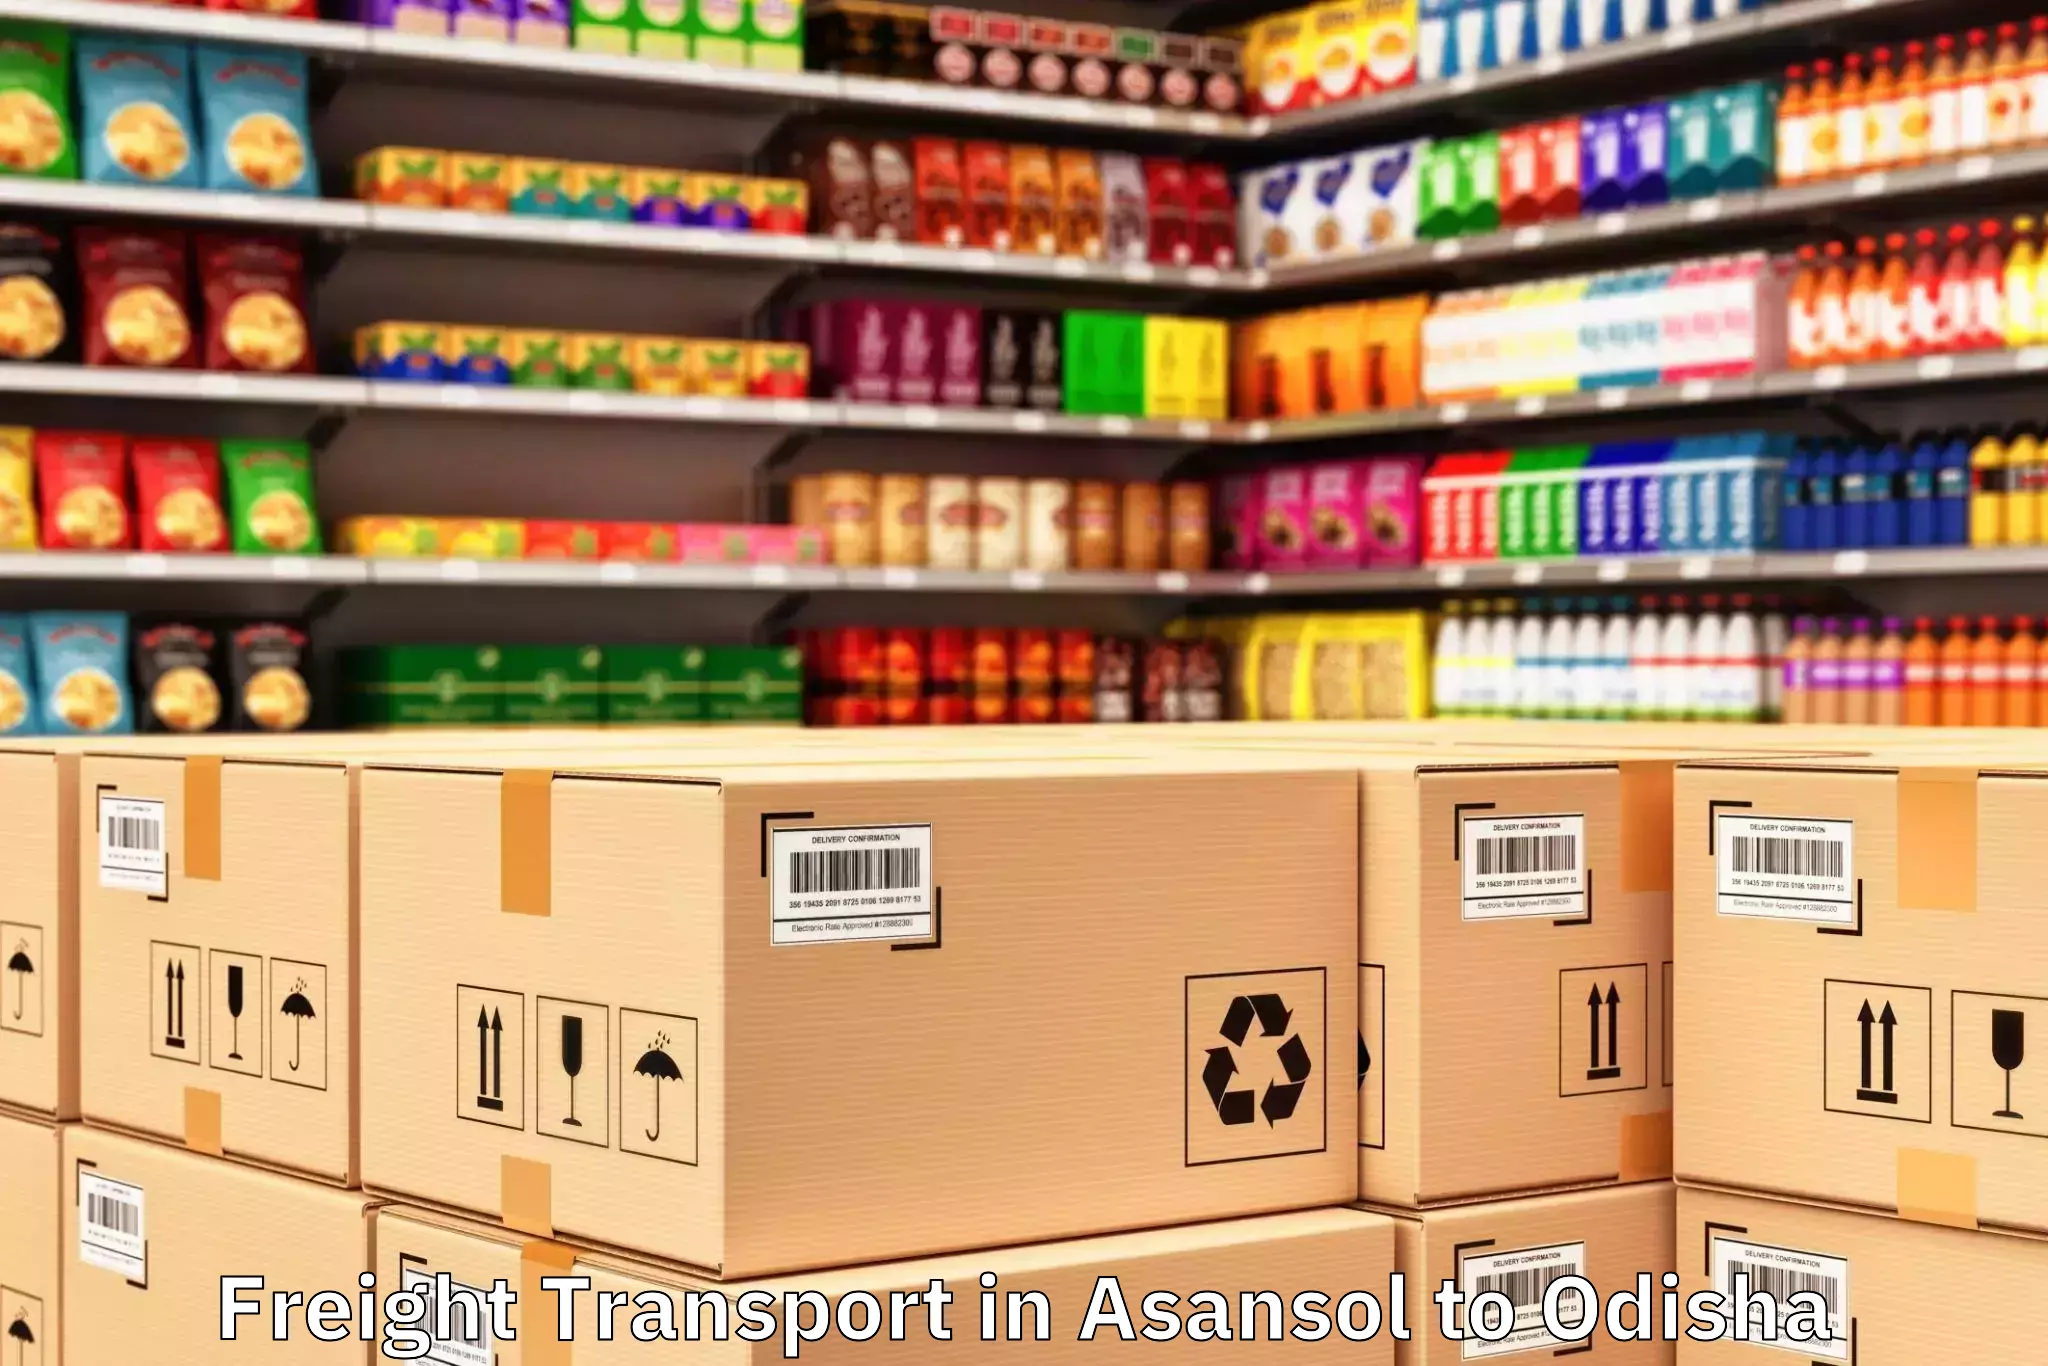 Professional Asansol to Kalapathar Cuttack Freight Transport